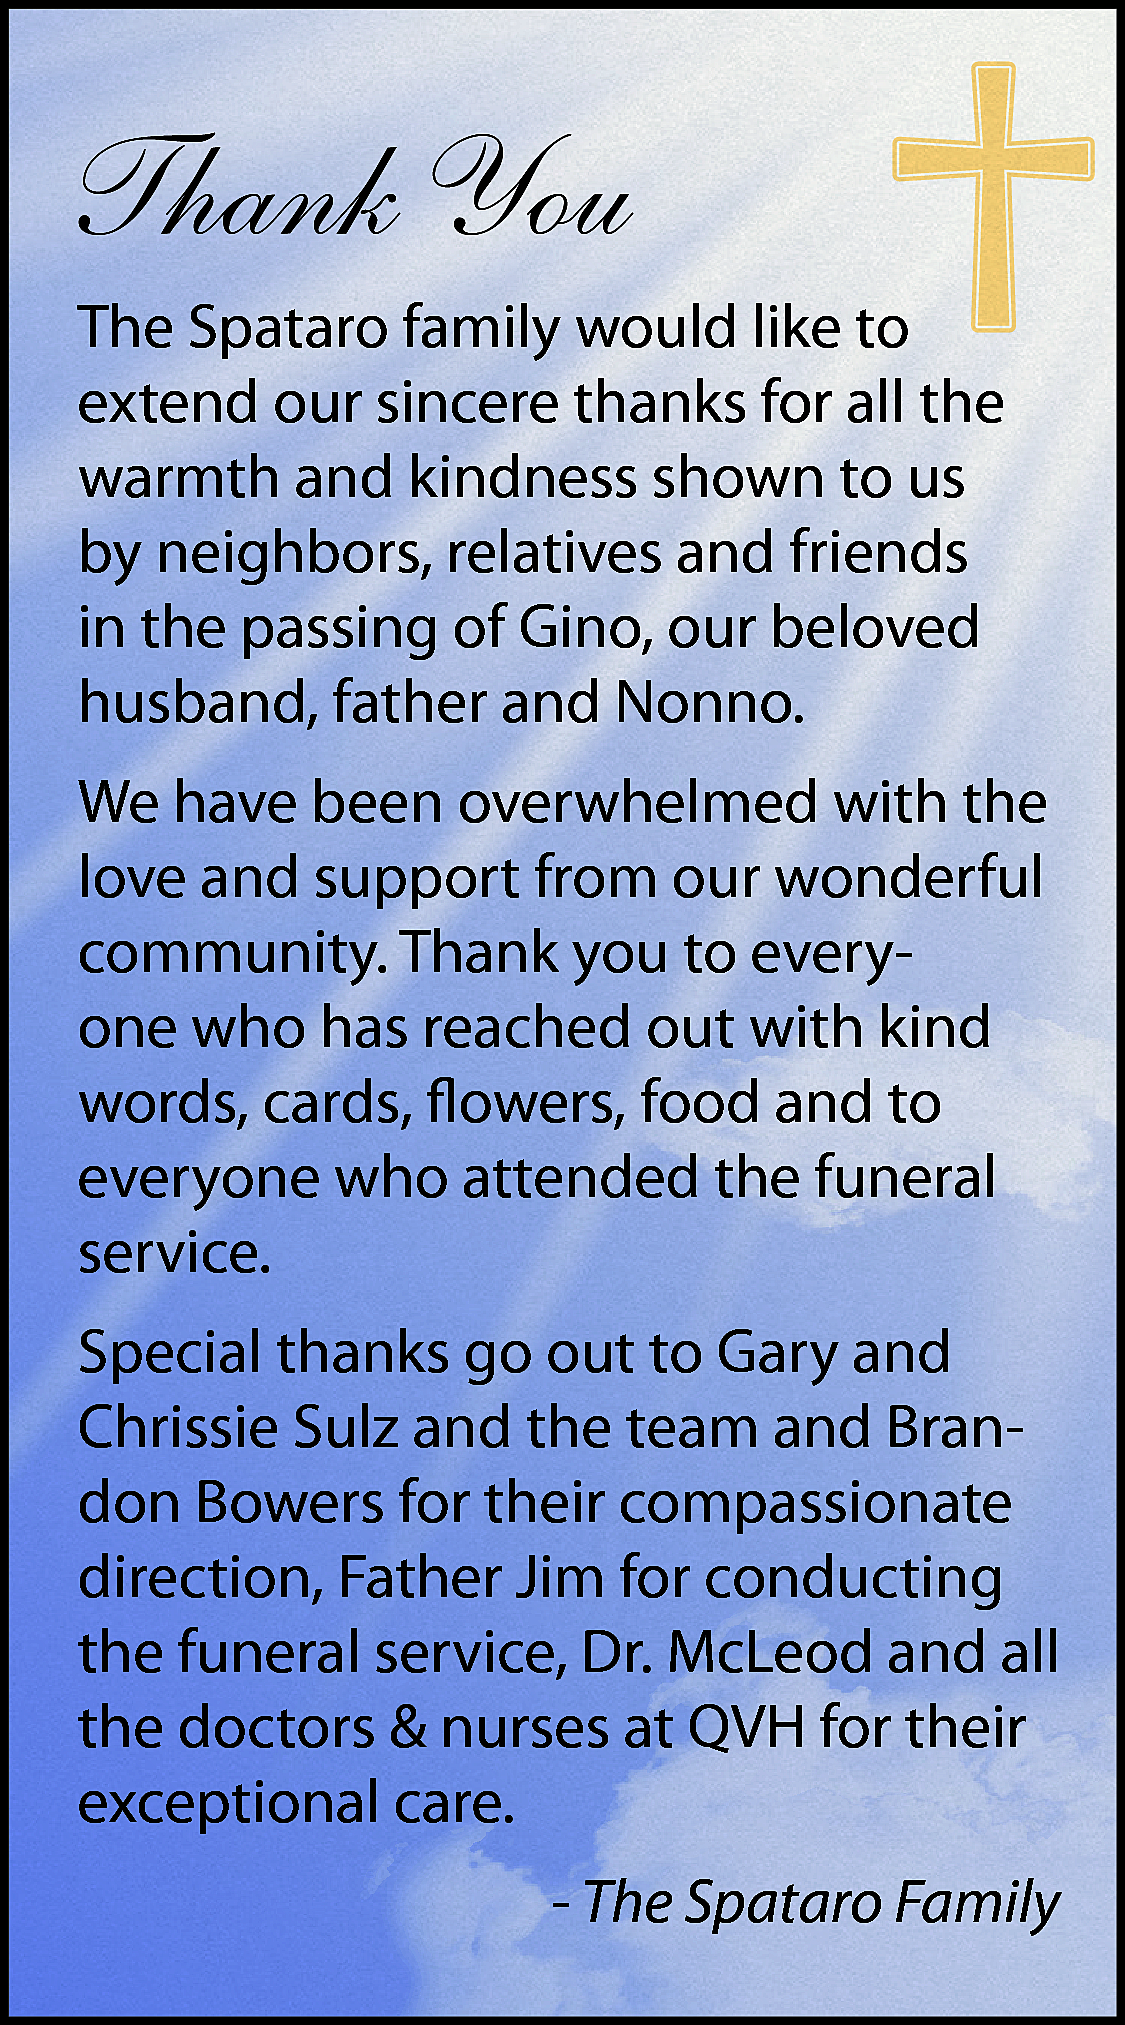 Thank You <br>The Spataro family  Thank You  The Spataro family would like to  extend our sincere thanks for all the  warmth and kindness shown to us  by neighbors, relatives and friends  in the passing of Gino, our beloved  husband, father and Nonno.  We have been overwhelmed with the  love and support from our wonderful  community. Thank you to everyone who has reached out with kind  words, cards, flowers, food and to  everyone who attended the funeral  service.  Special thanks go out to Gary and  Chrissie Sulz and the team and Brandon Bowers for their compassionate  direction, Father Jim for conducting  the funeral service, Dr. McLeod and all  the doctors & nurses at QVH for their  exceptional care.  - The Spataro Family    